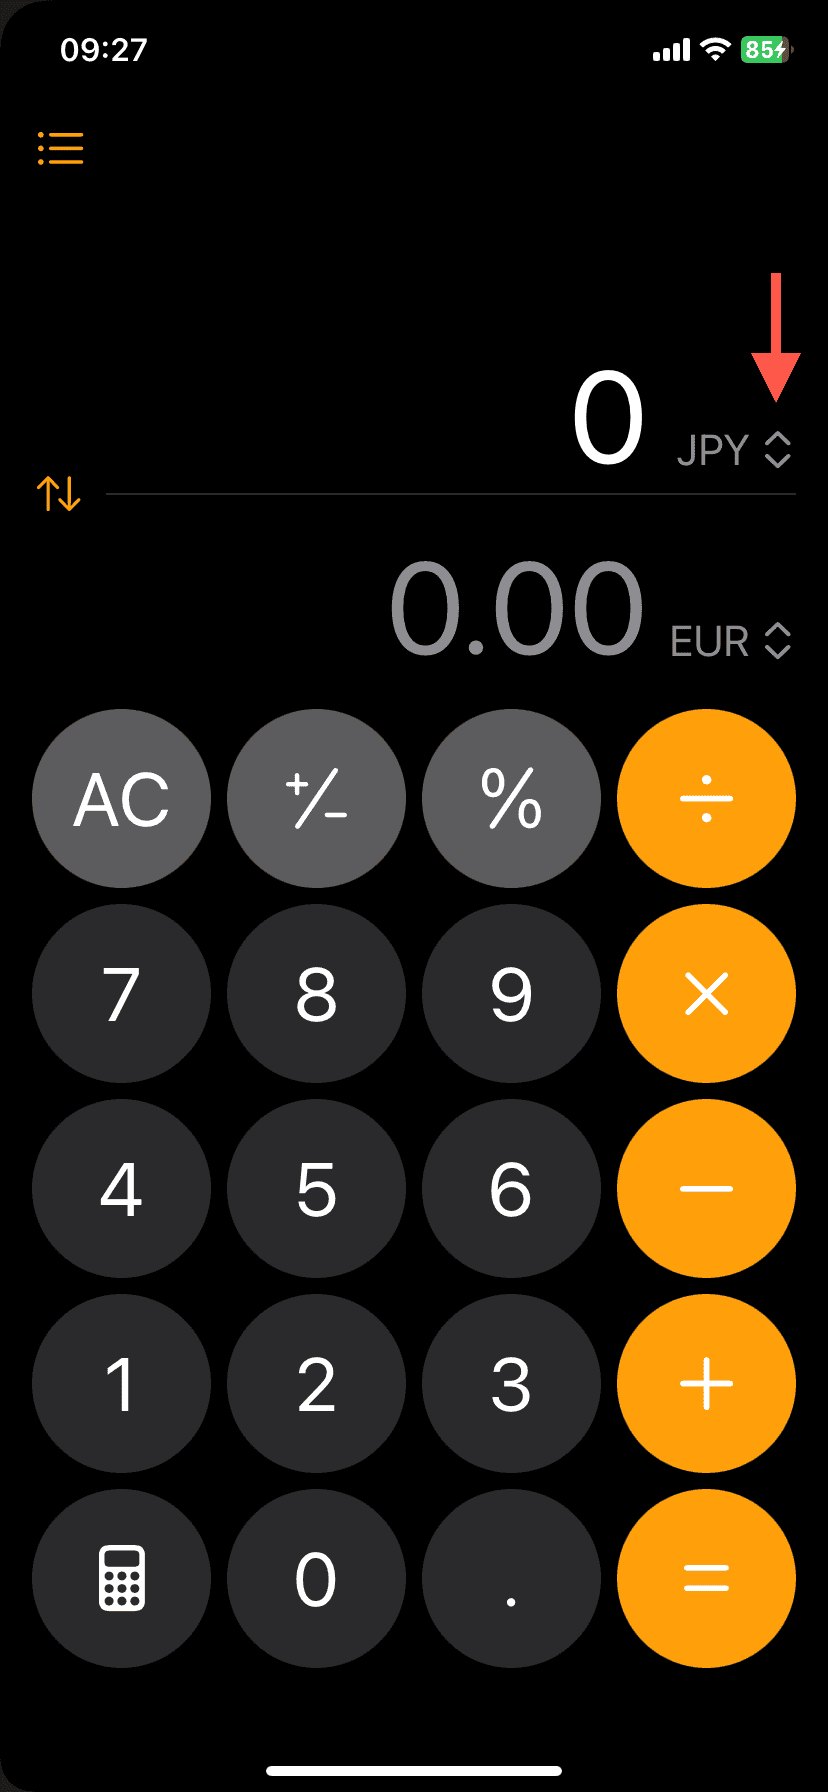 The Convert mode in the Calculator app for iOS 18.